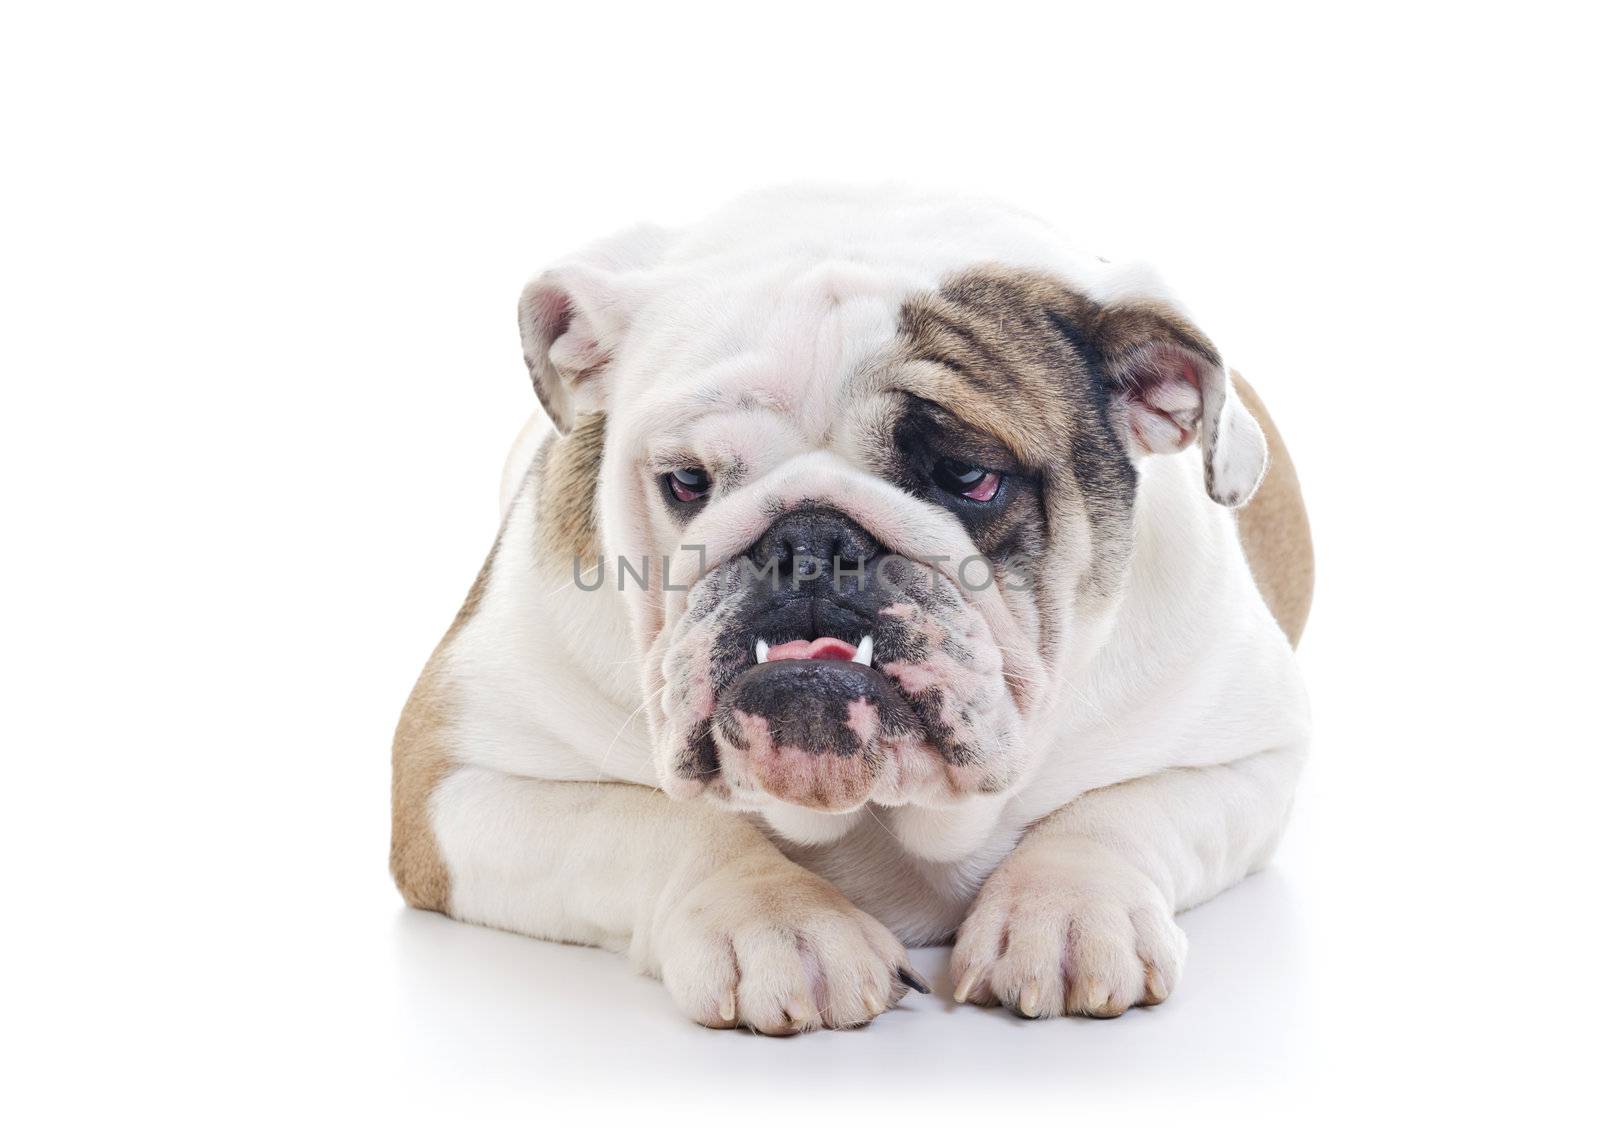 English Bulldog laying and looking off camera, over white background